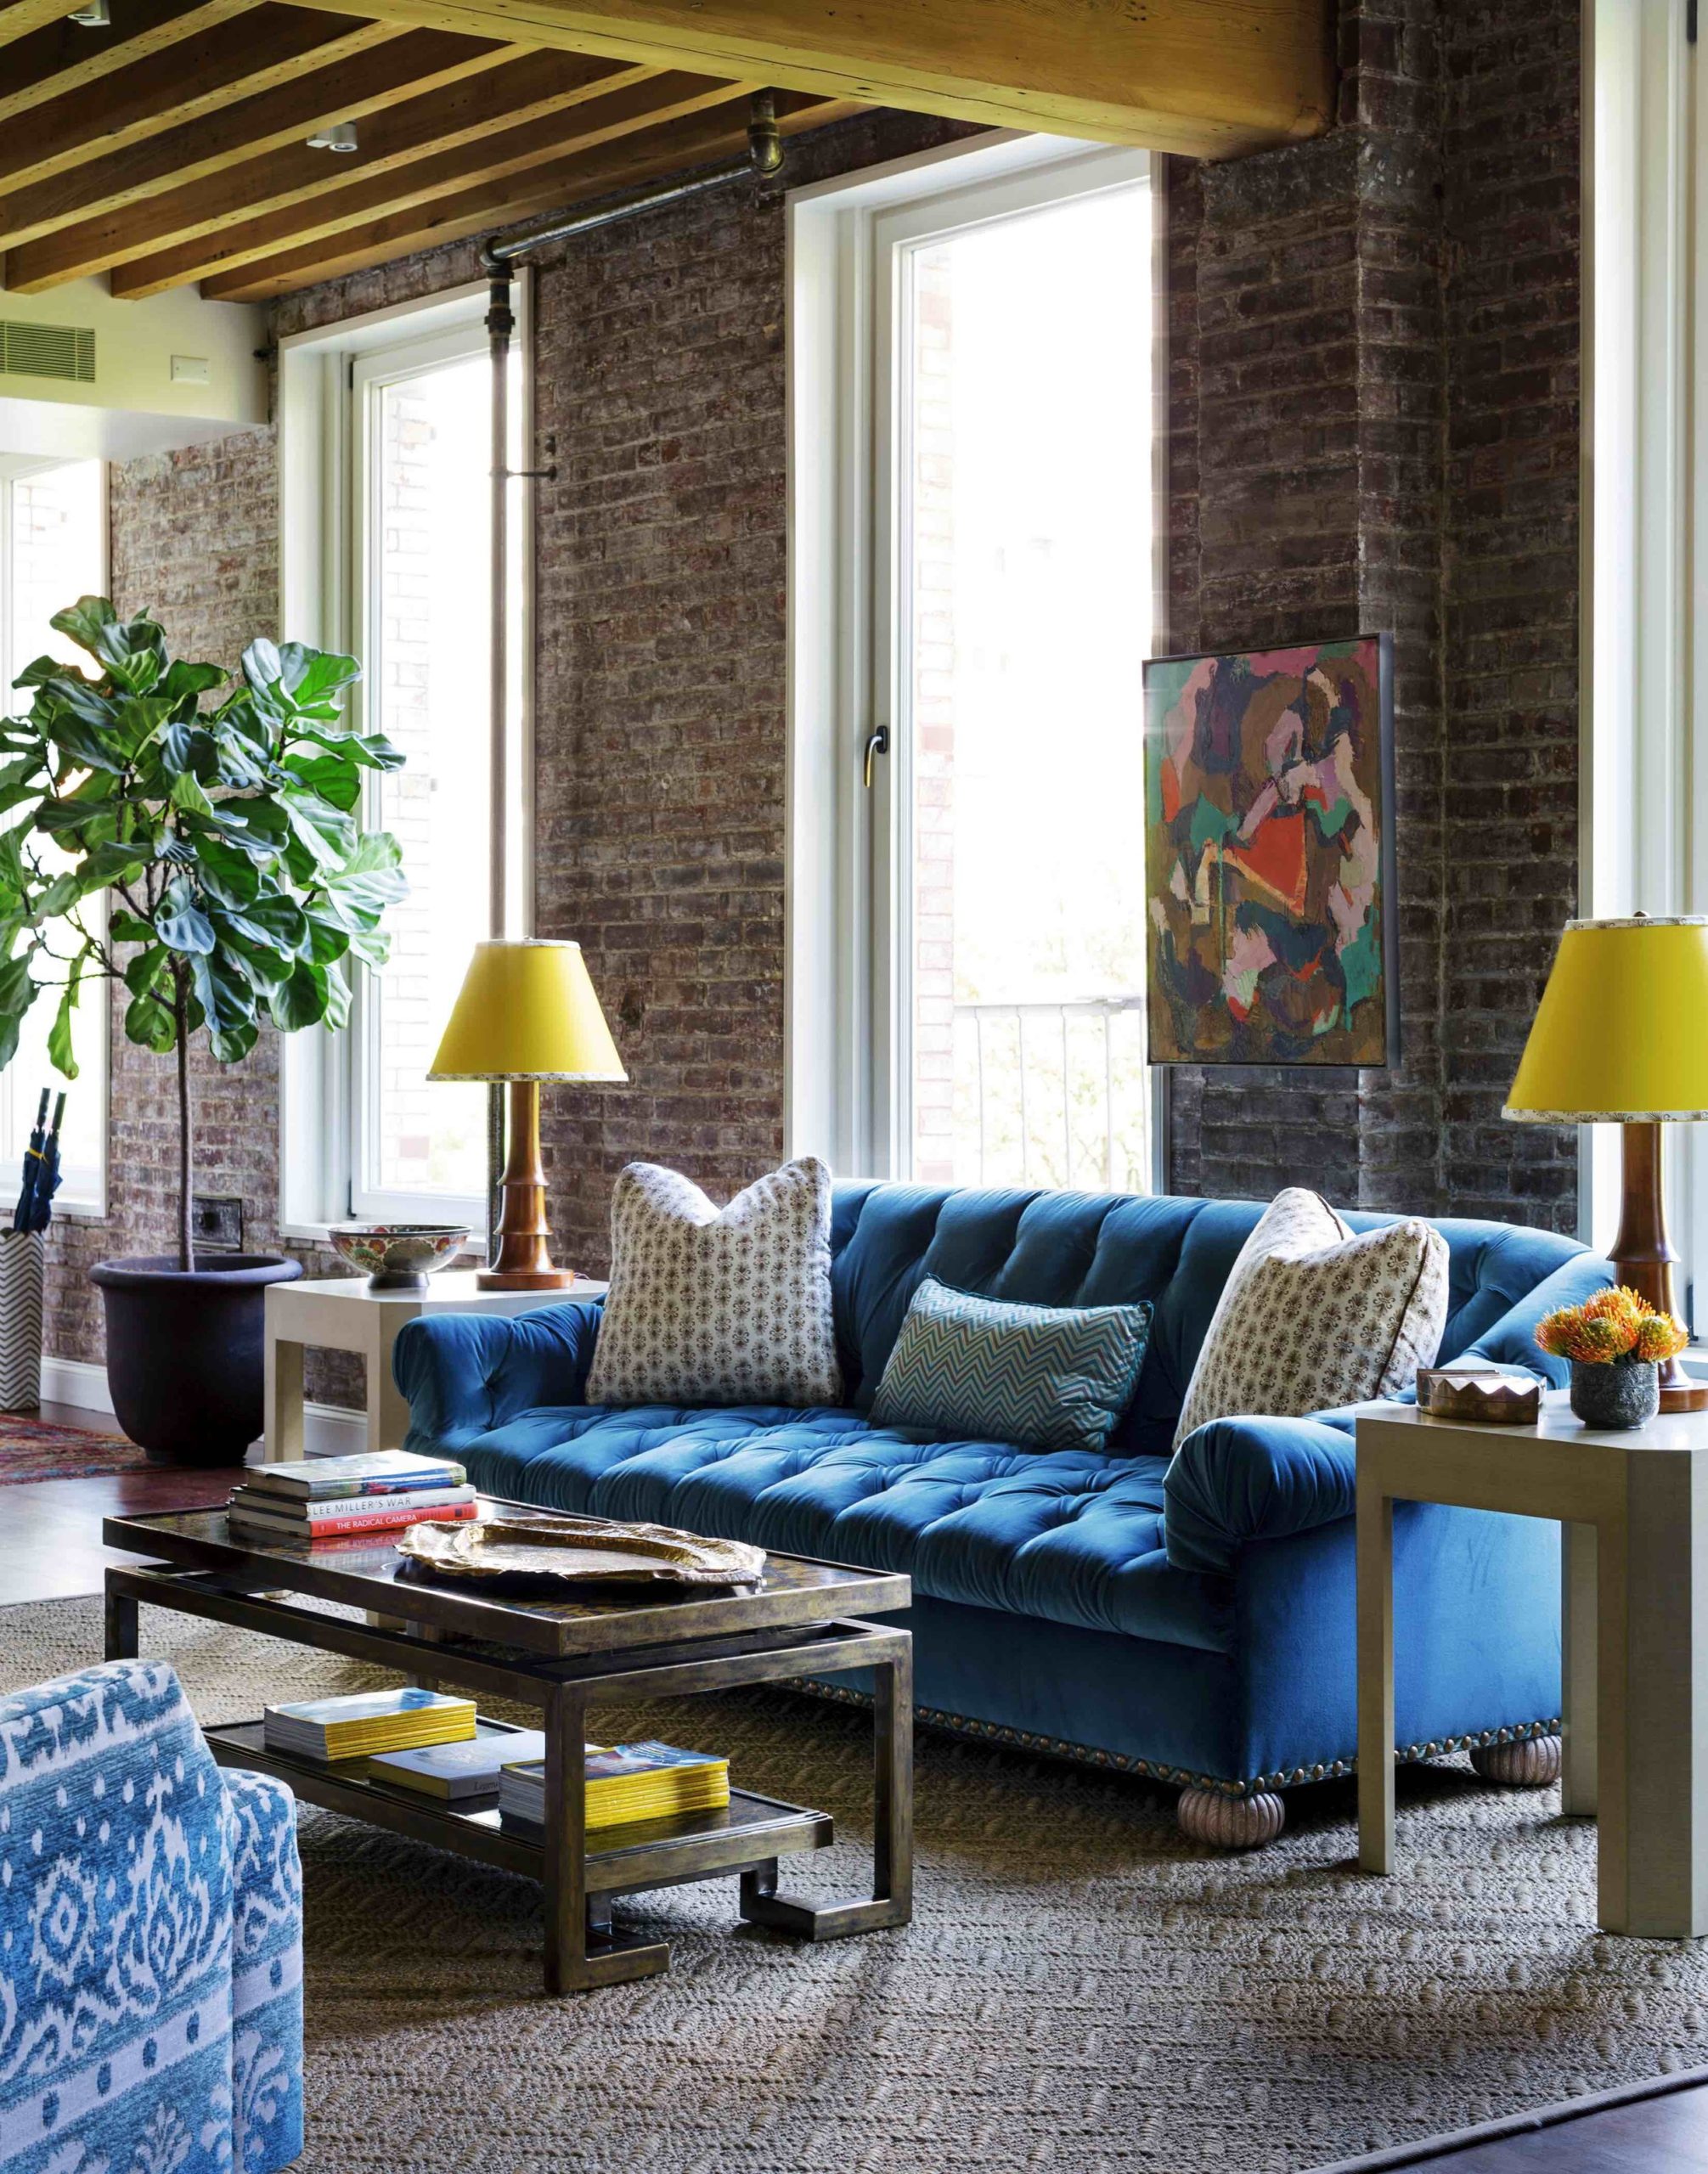 Exposed brick walls and blue sofa are a charming combo (from Jenny San Martin Design)